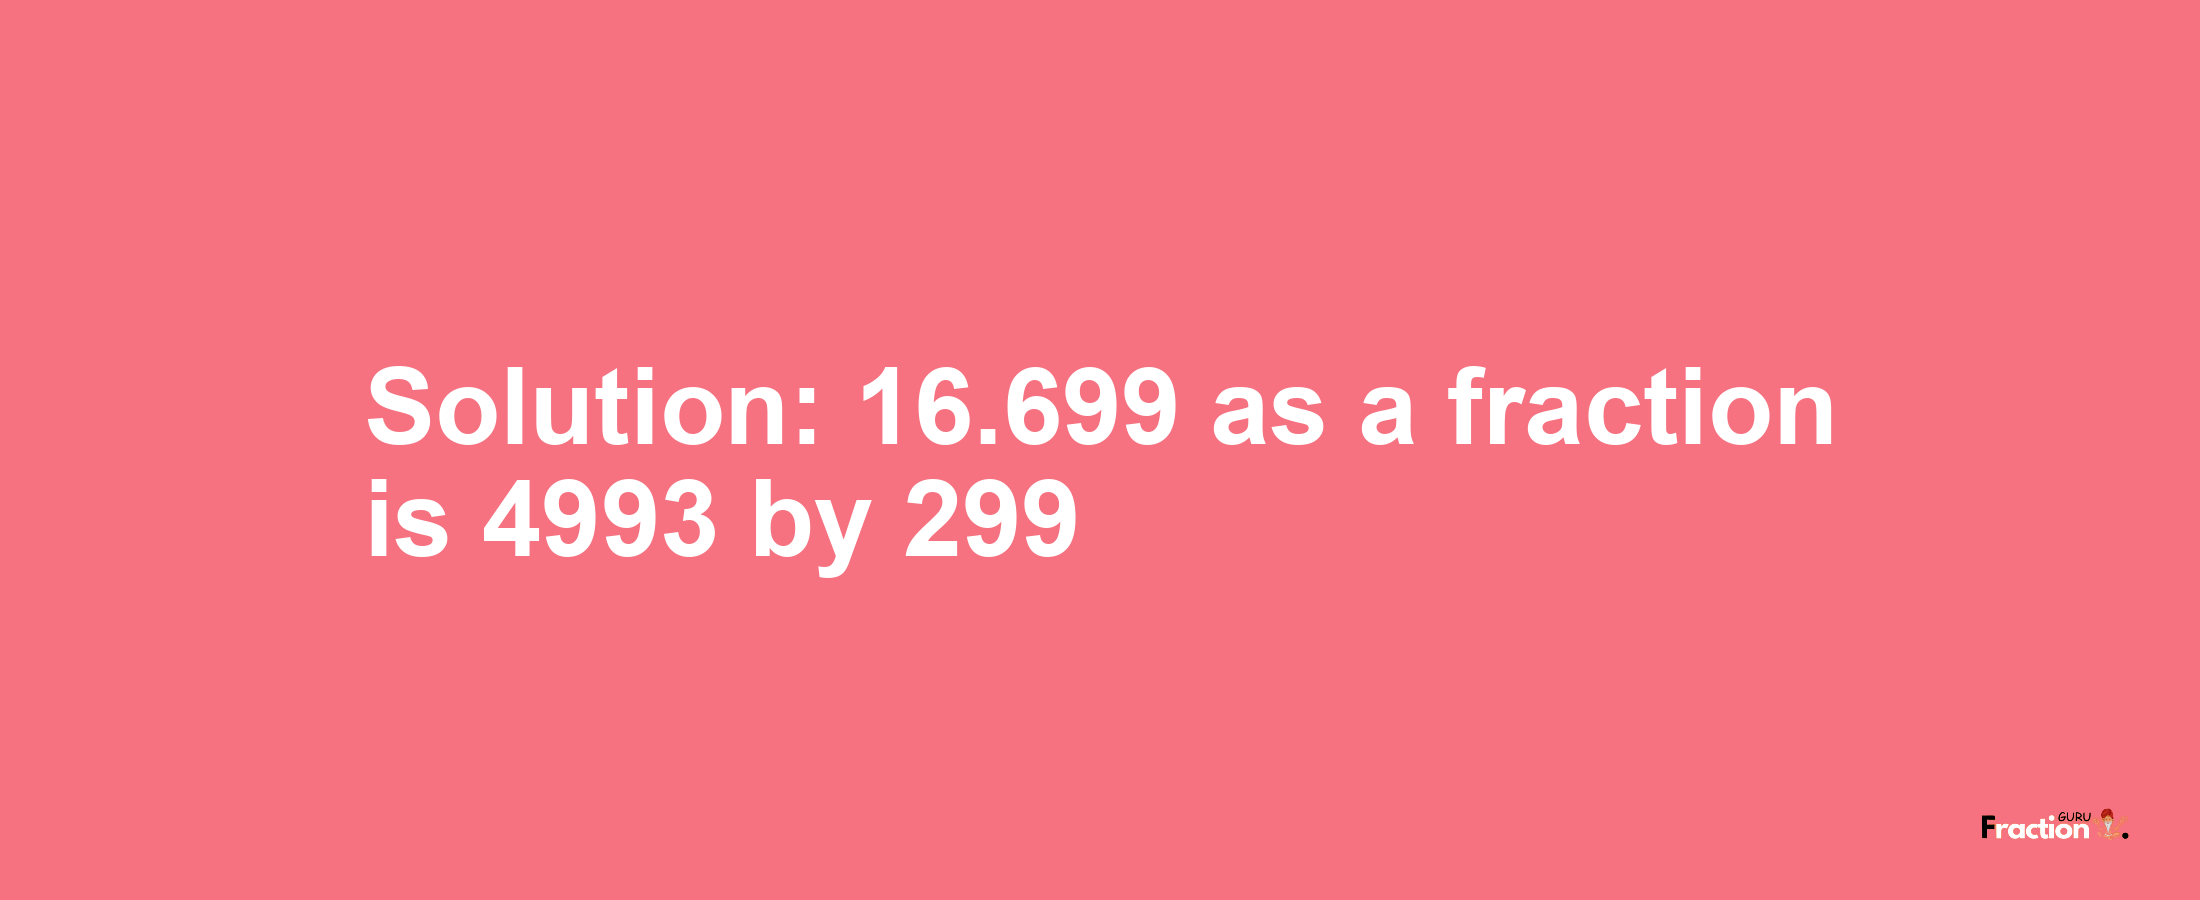 Solution:16.699 as a fraction is 4993/299